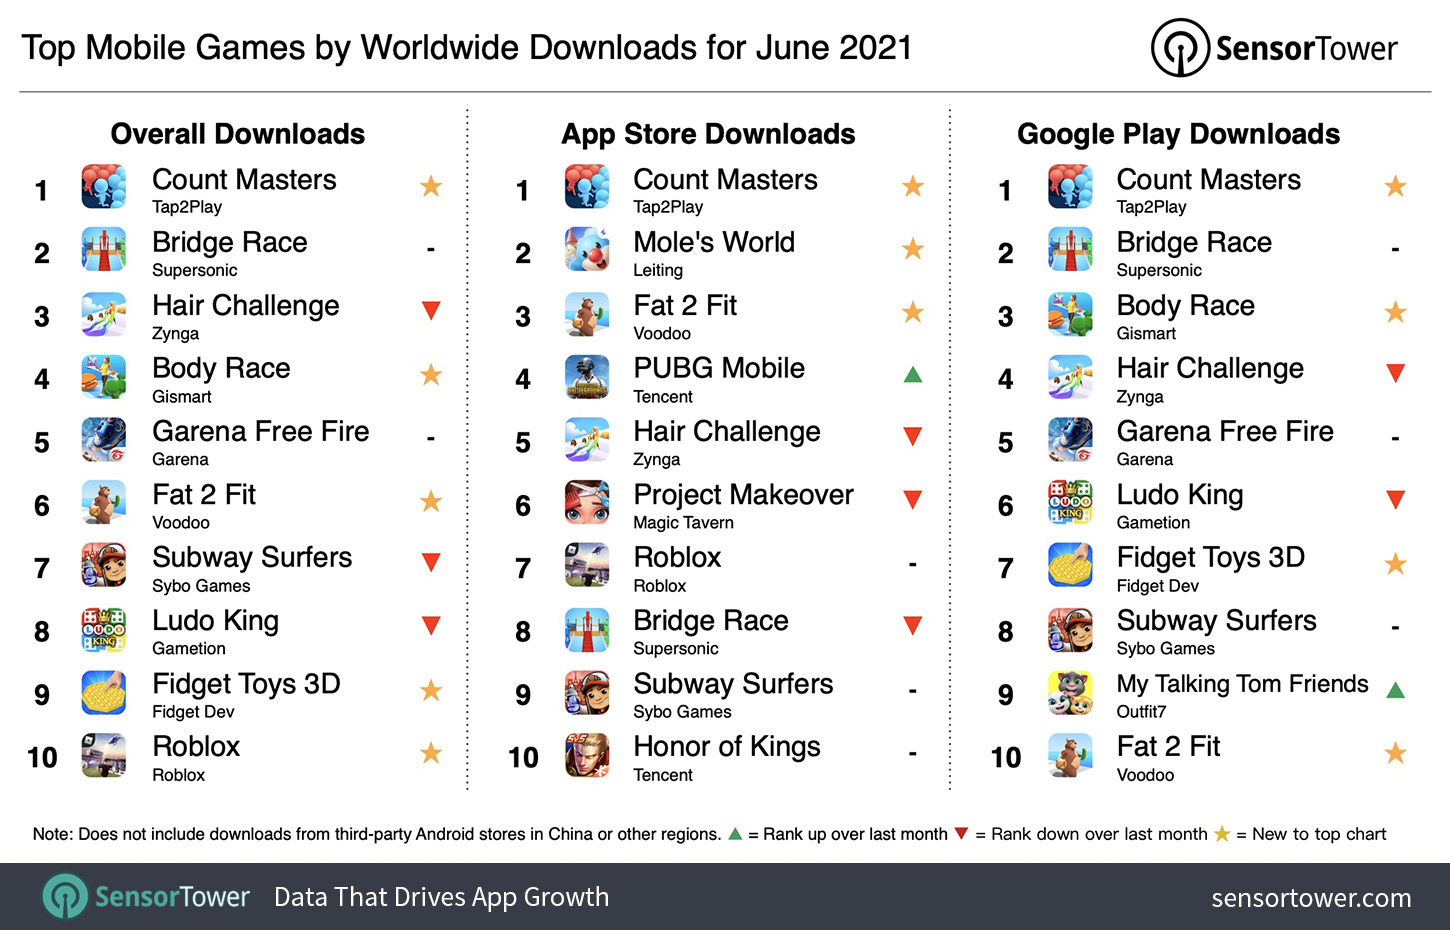 Top Mobile Games Worldwide for June 2021 by Downloads